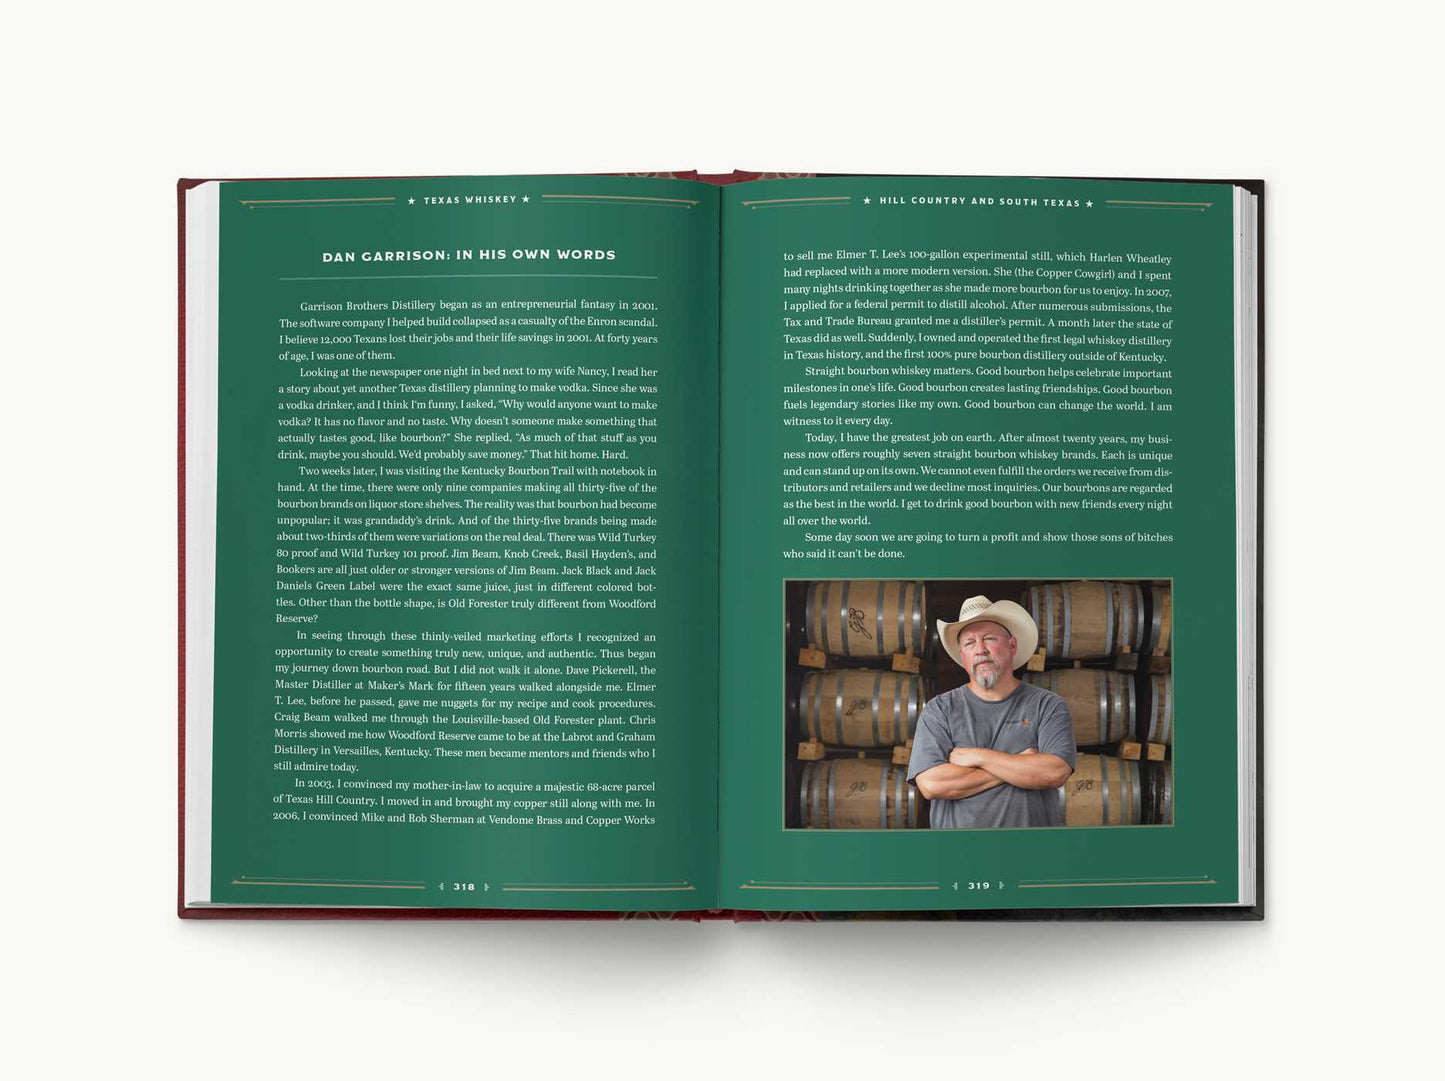 Texas Whiskey: A Rich History of Distilling Whiskey in the Lone Star State